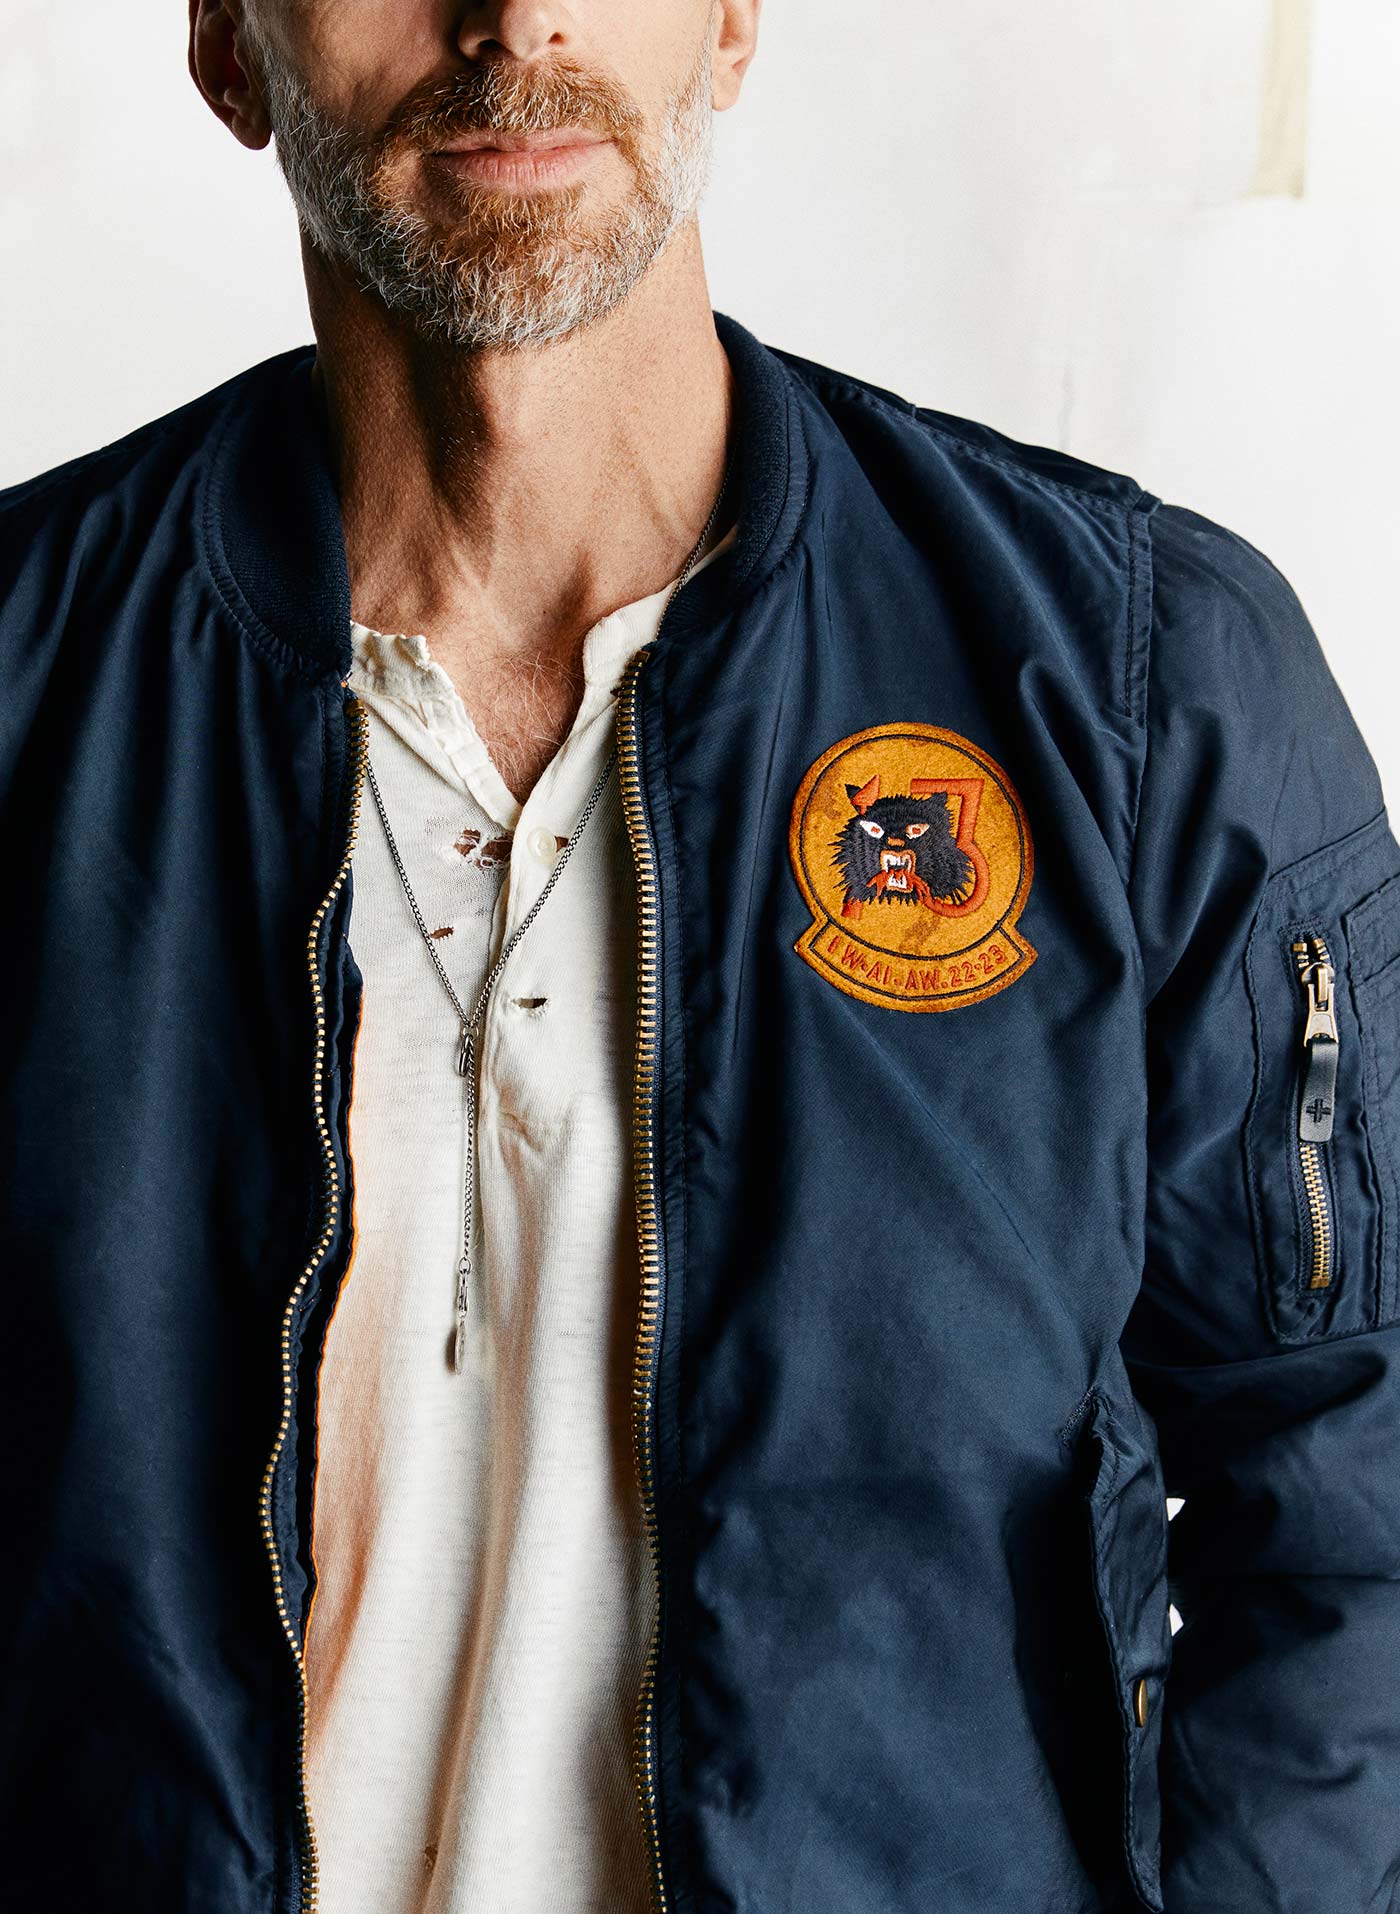 Woodies Clothing The Next Generation Bomber Jacket in Navy